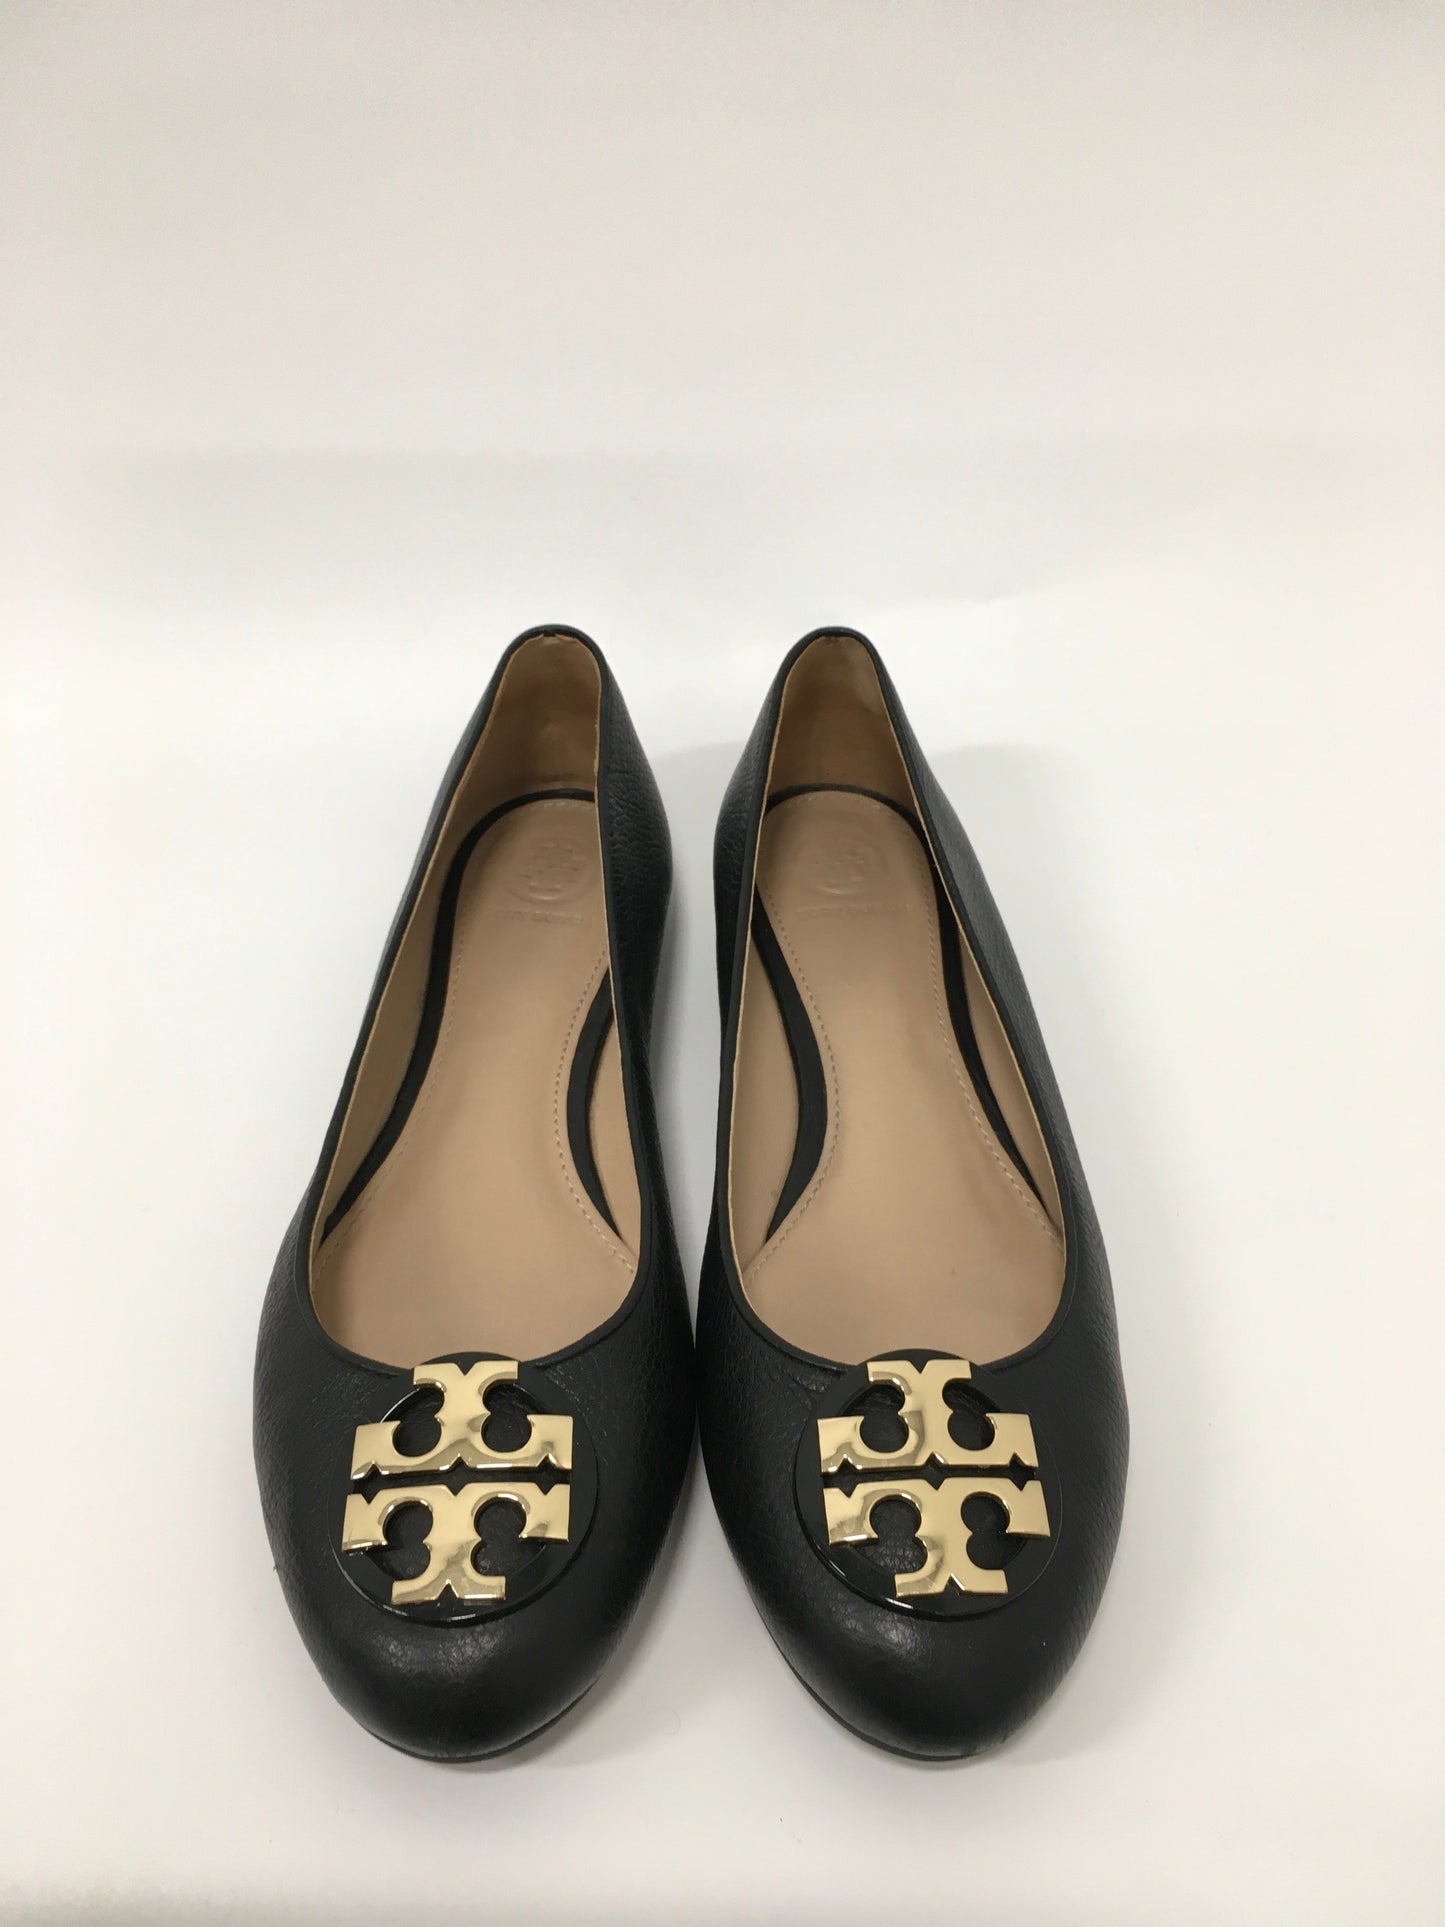 Shoes Flats Ballet By Tory Burch  Size: 8